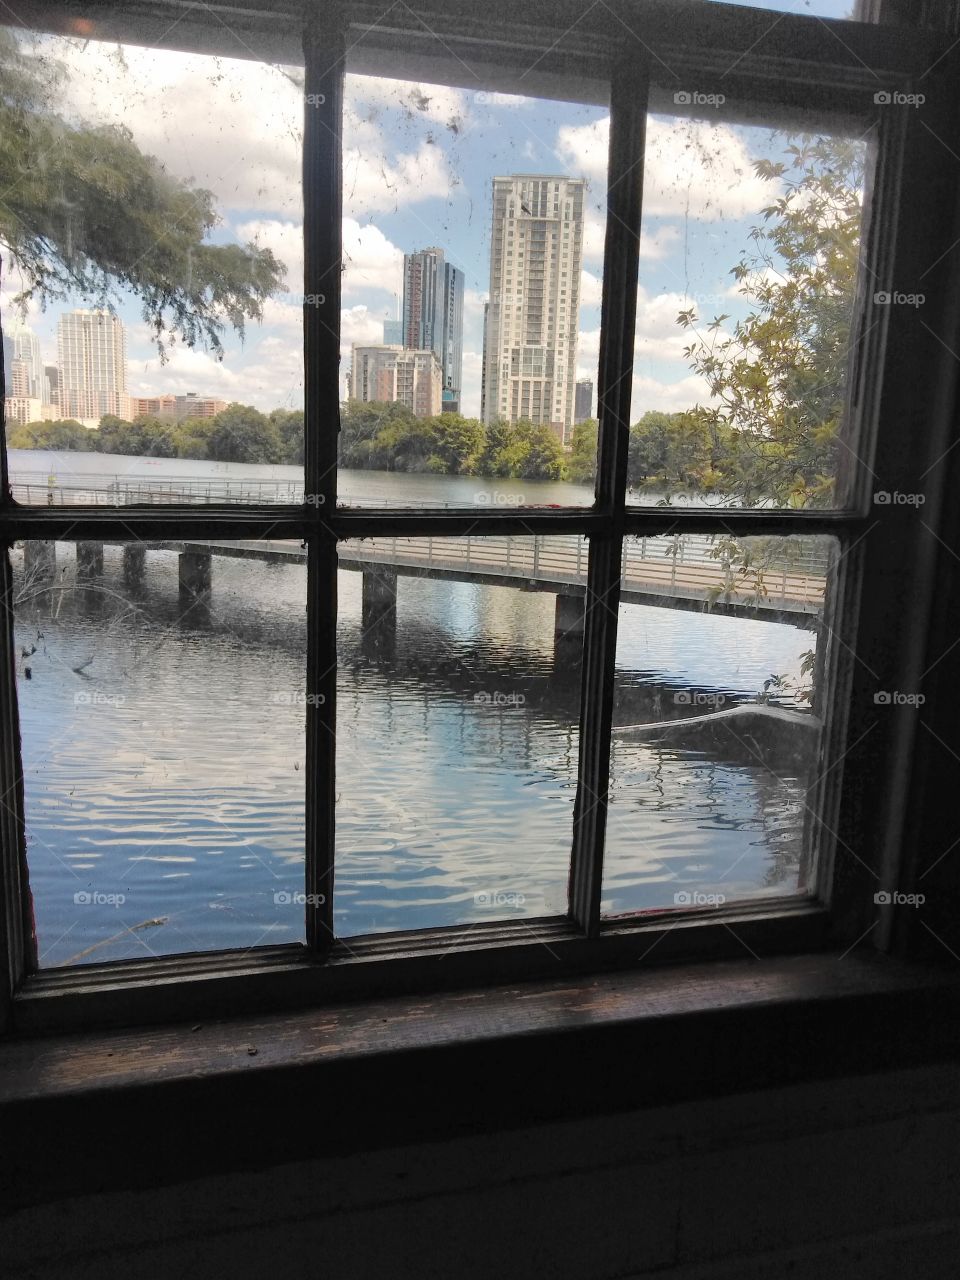 view out of Joe's crab shack of austin